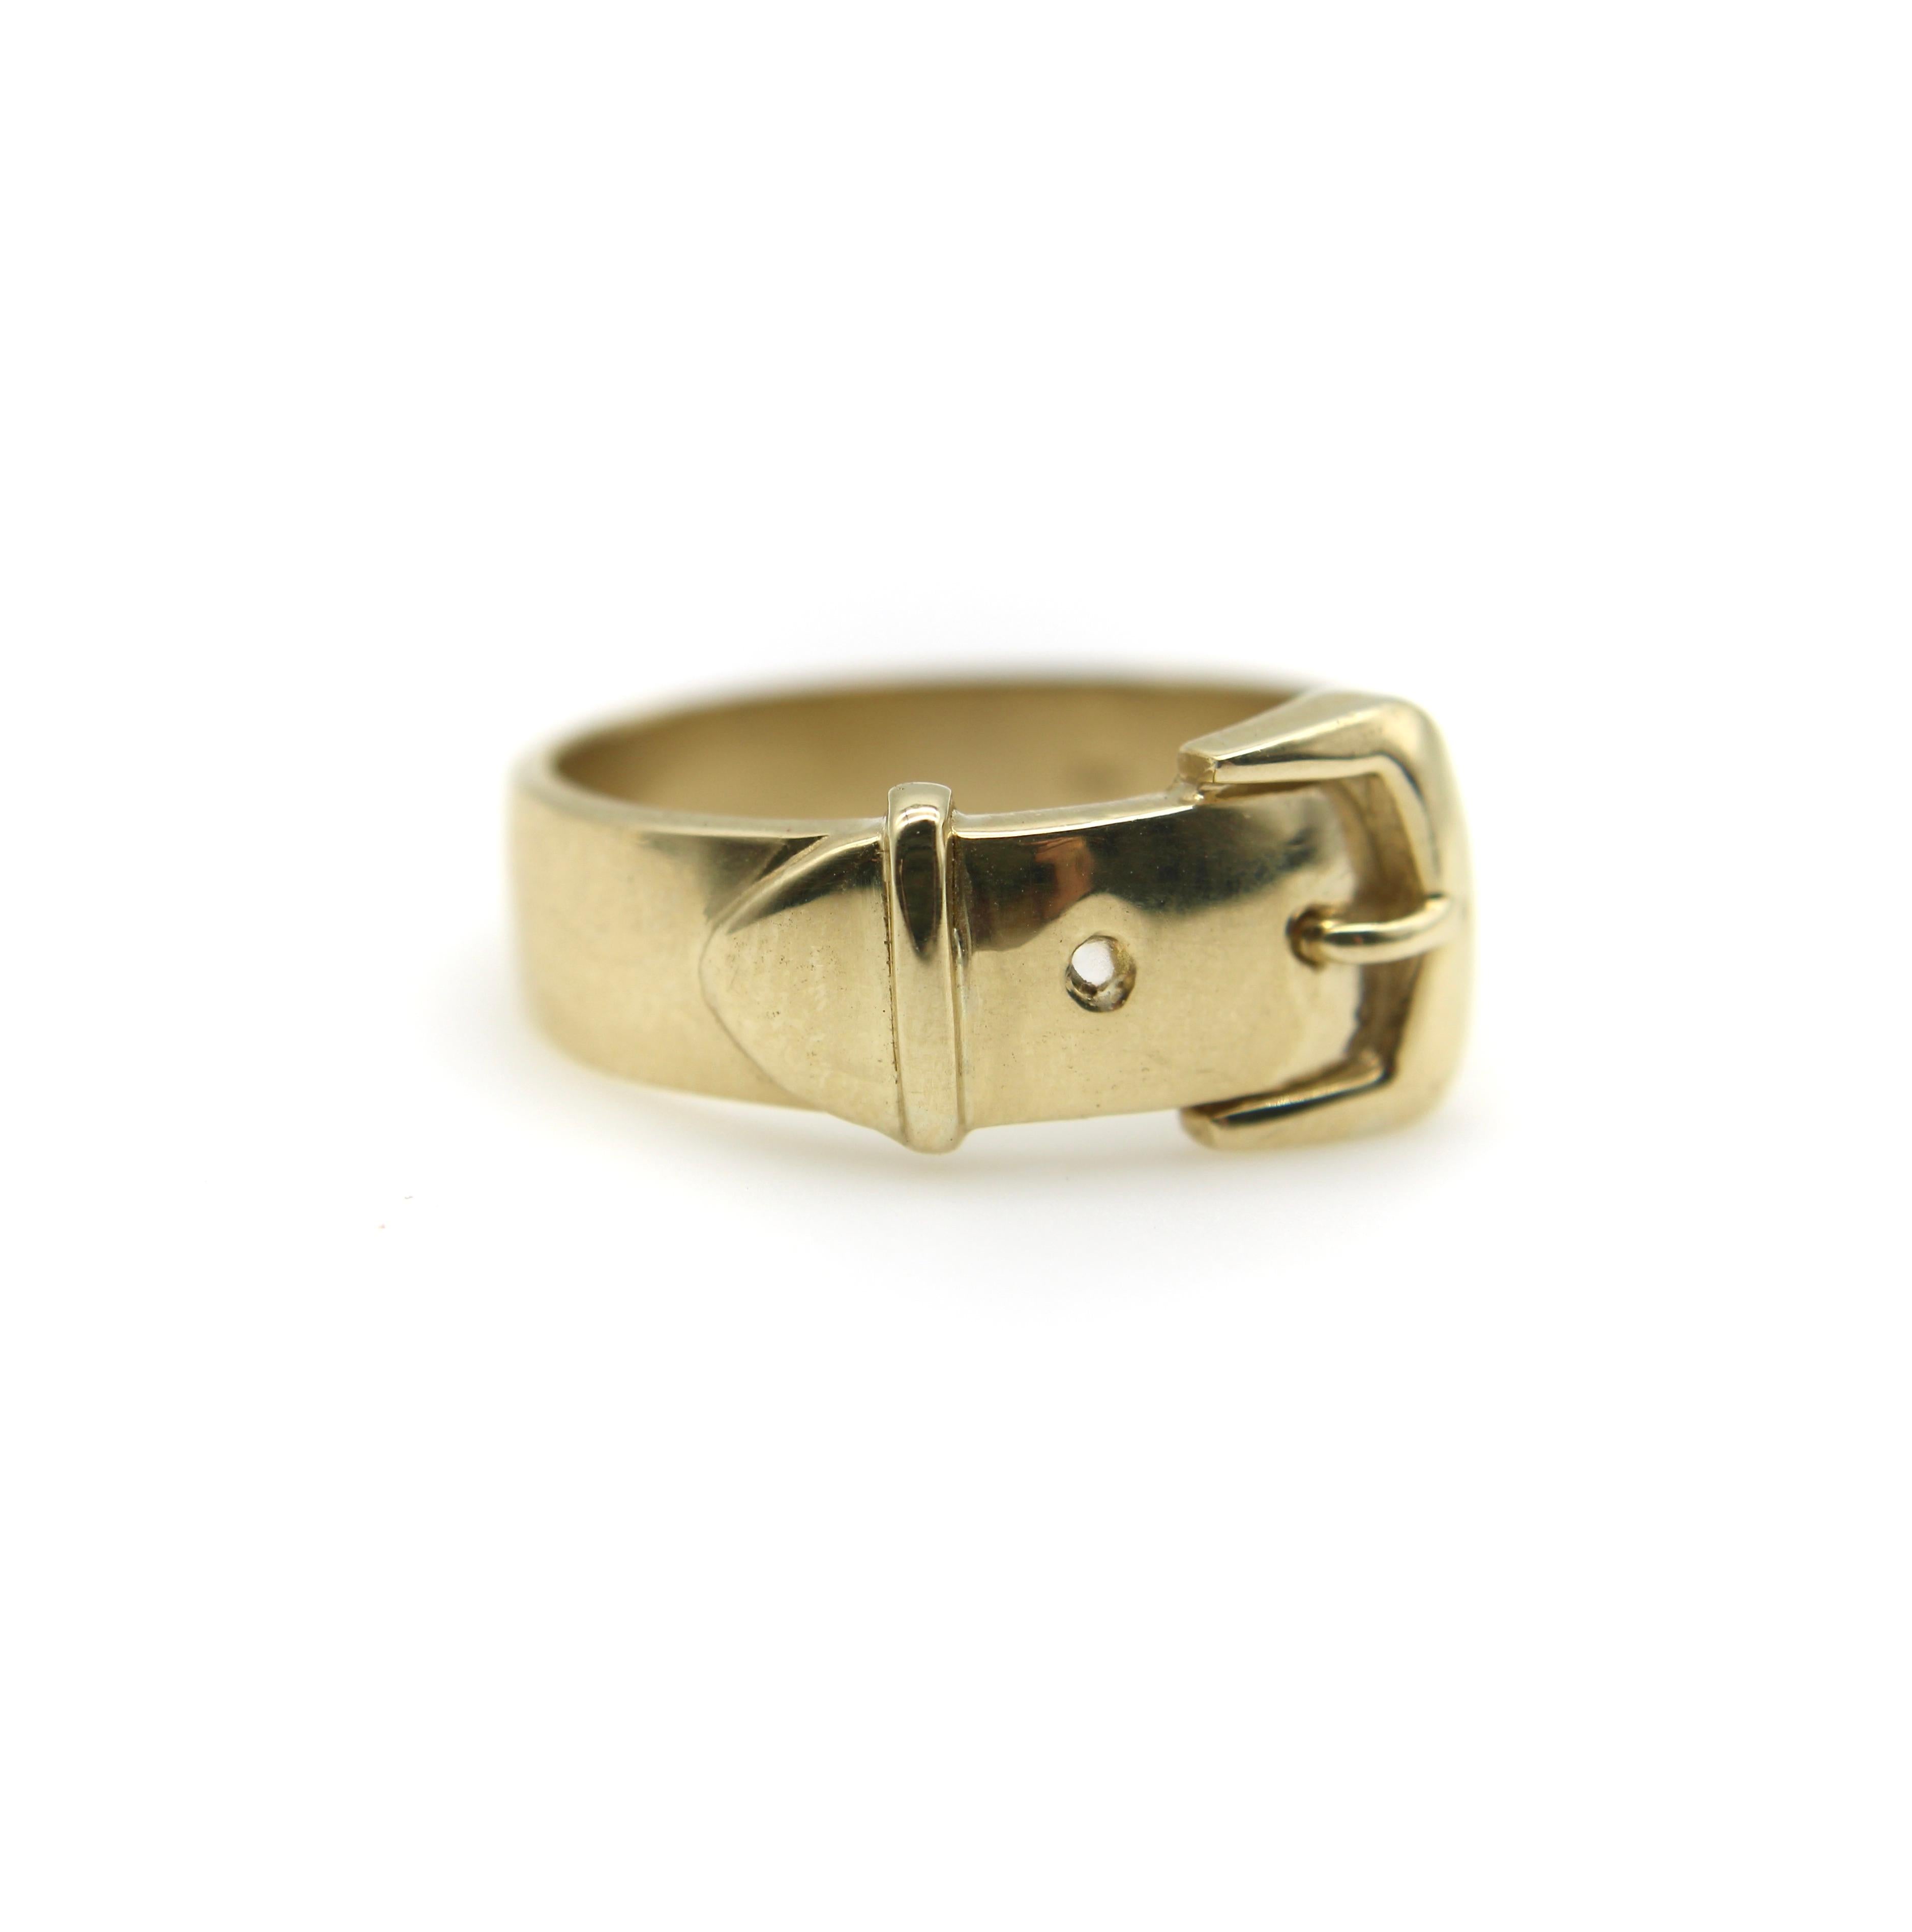 This 14k gold Victorian inspired ring is the perfect expression of everlasting love. Made popular by Queen Victoria, buckle rings were a favorite motif during the 19th century and have remained in fashion ever since. The buckle symbolizes an